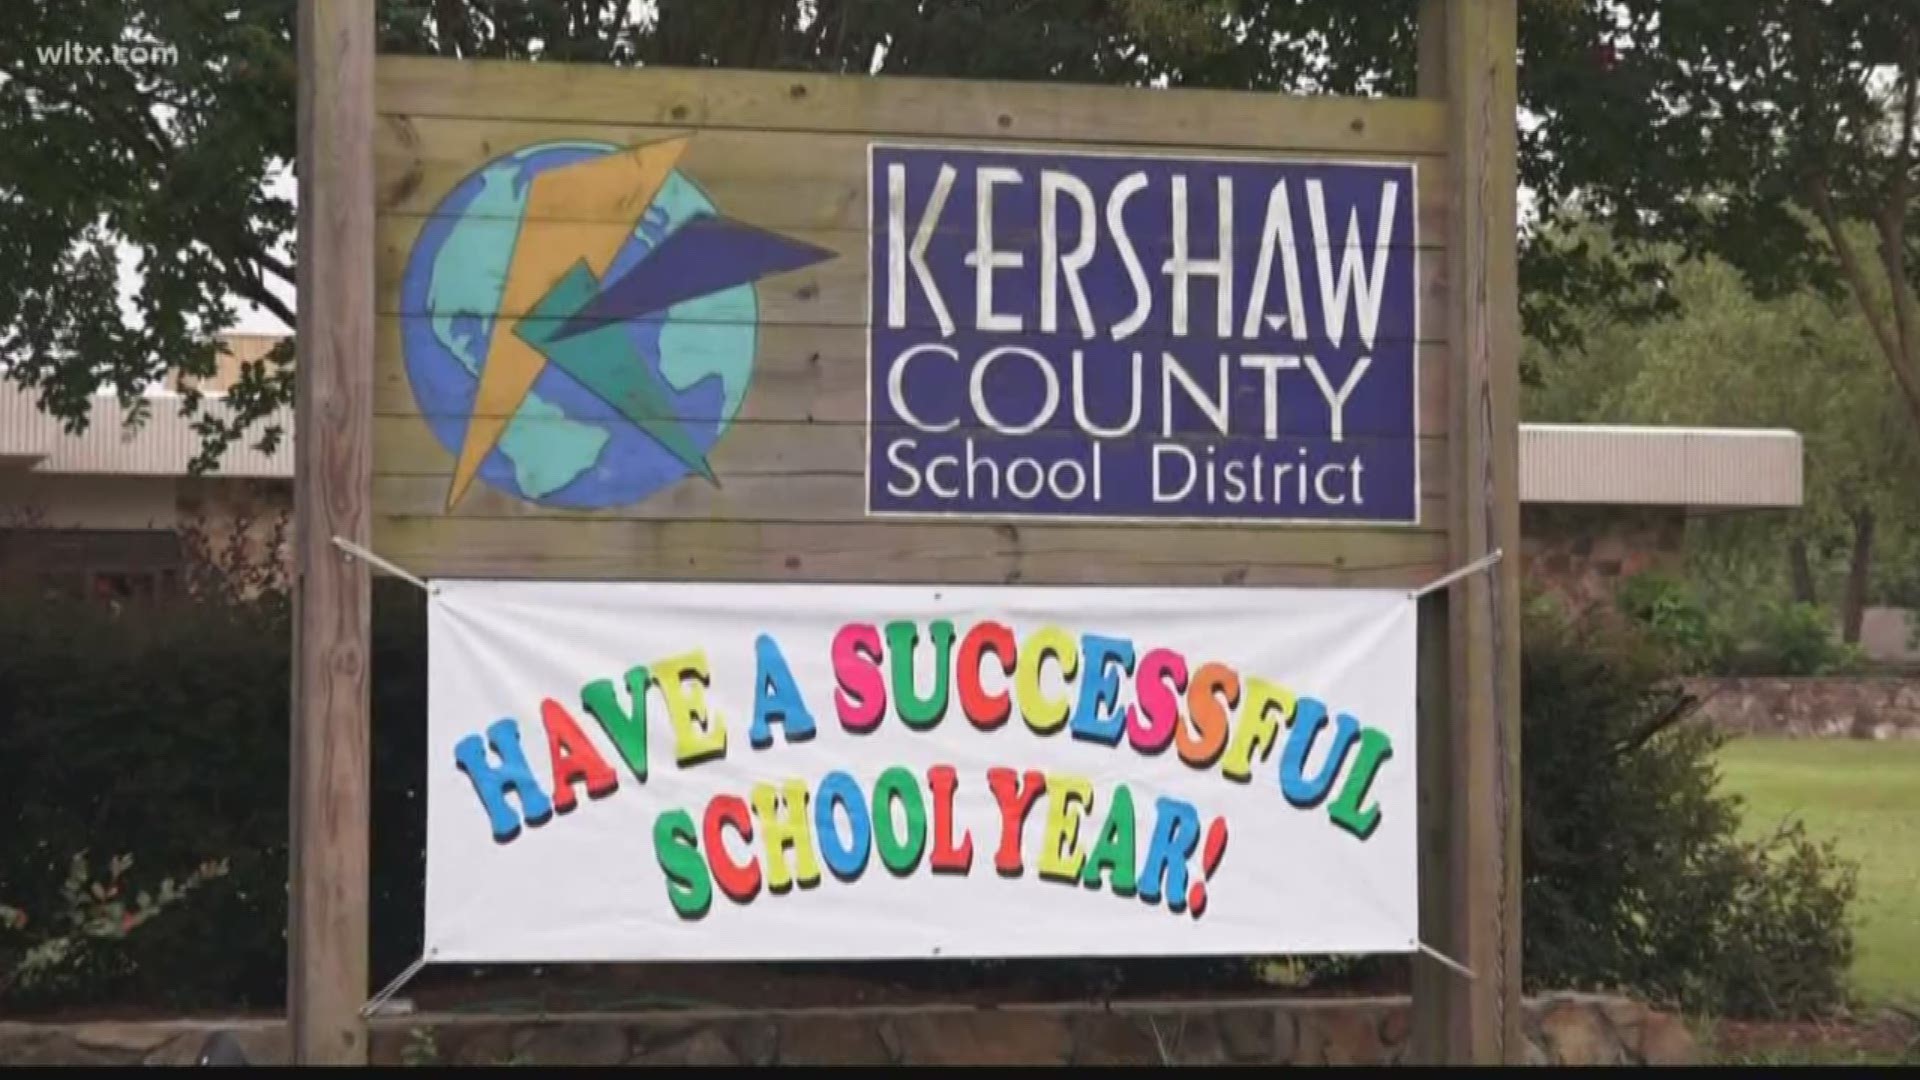 The school board for the Kershaw County School District has voted to close three of their elementary schools and combine them into one.